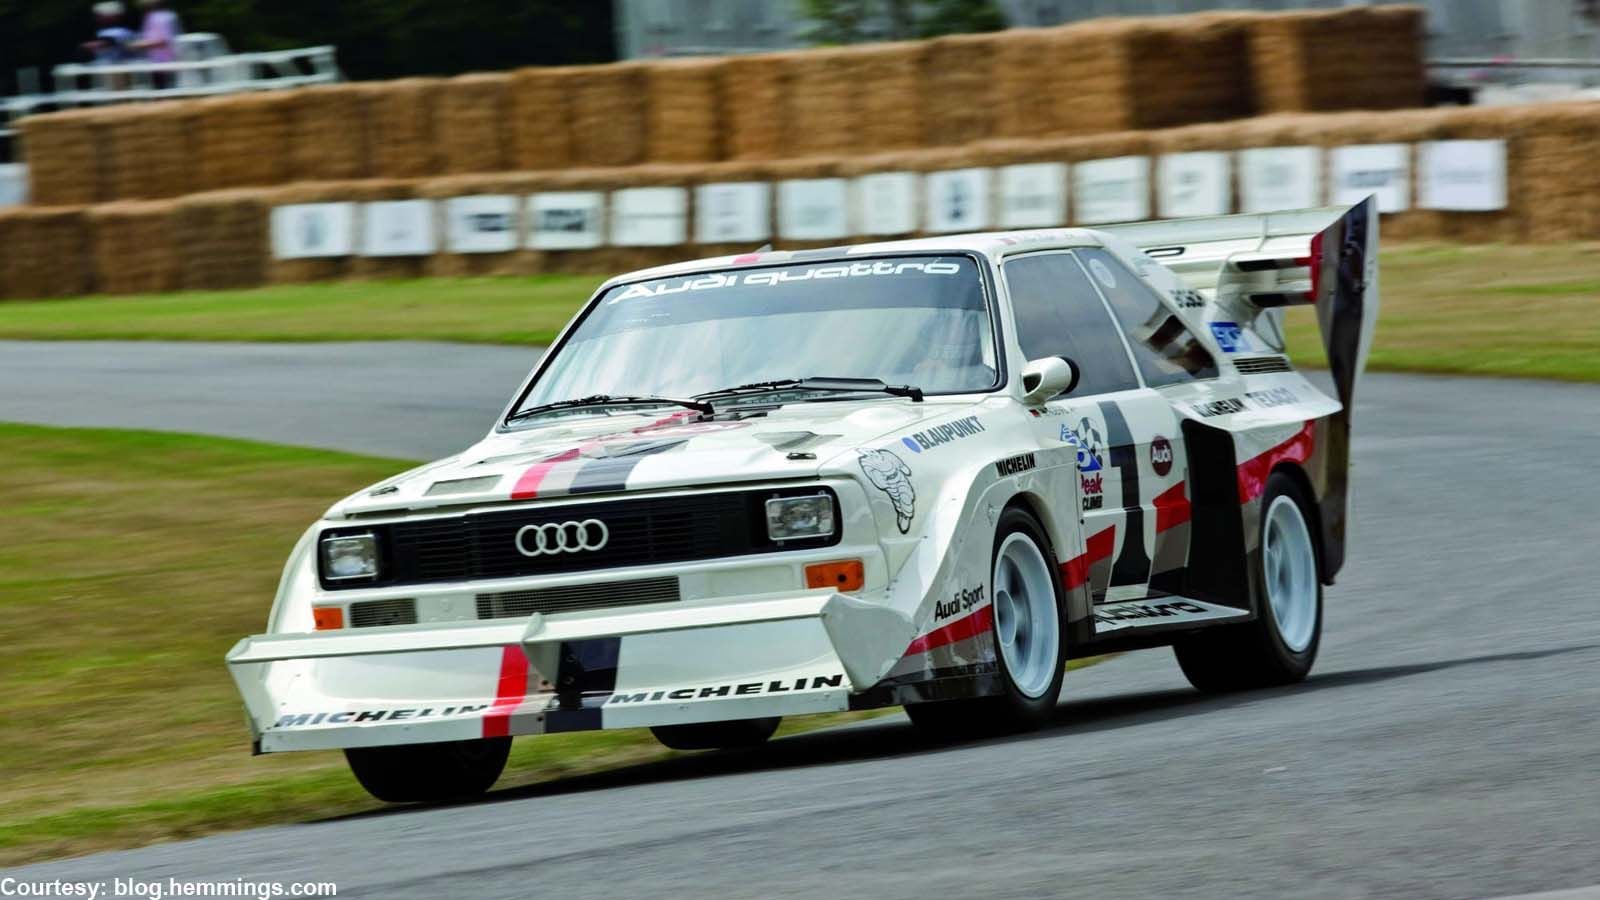 5 Facts About The Audi Quattro And Sport Quattro Rally Cars